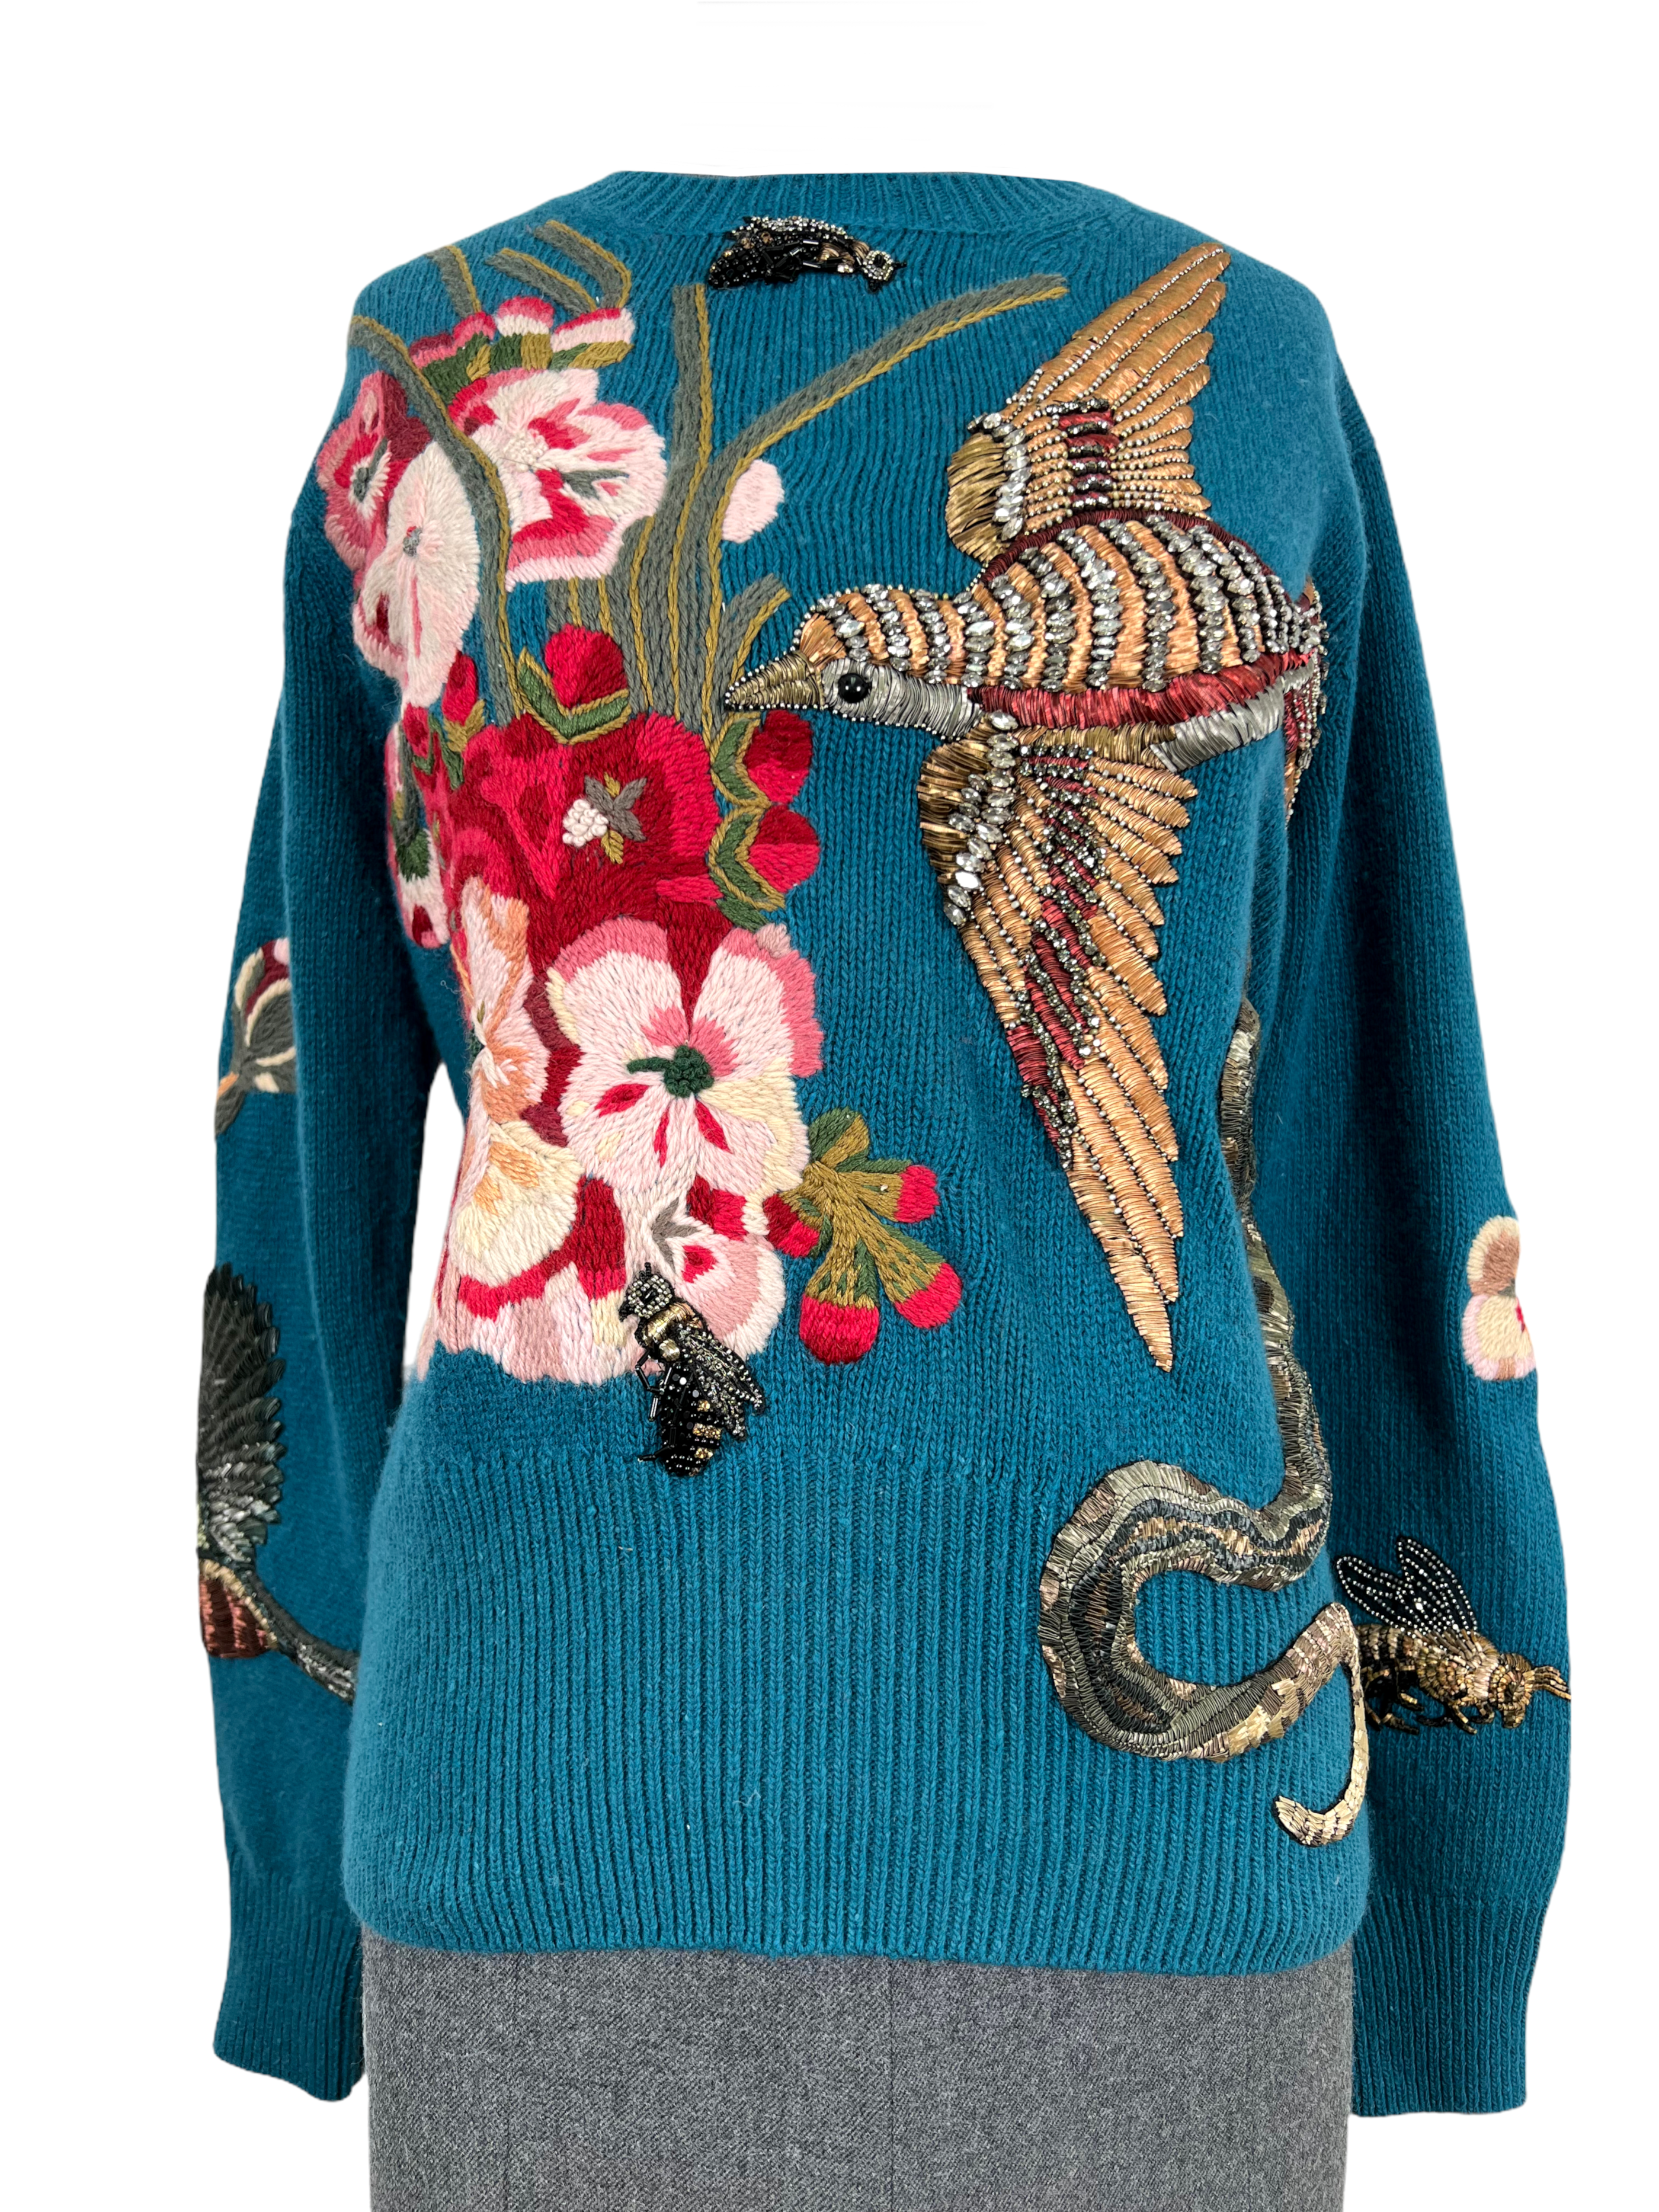 Gucci Embroidered Embellished Wool Sweater Size M - Consigned Designs